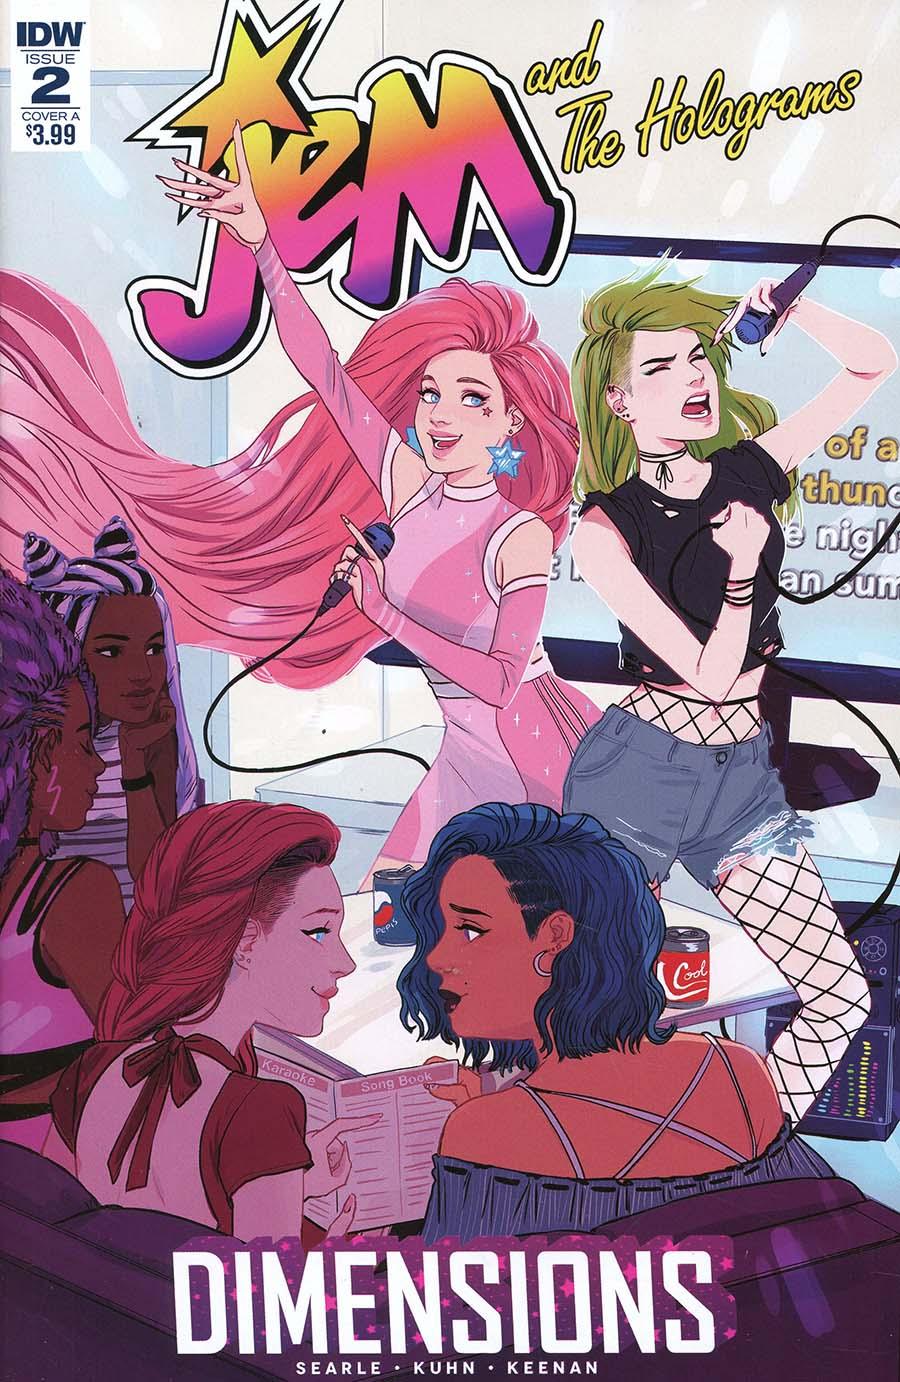 Jem And The Holograms Dimensions Vol. 1 #2